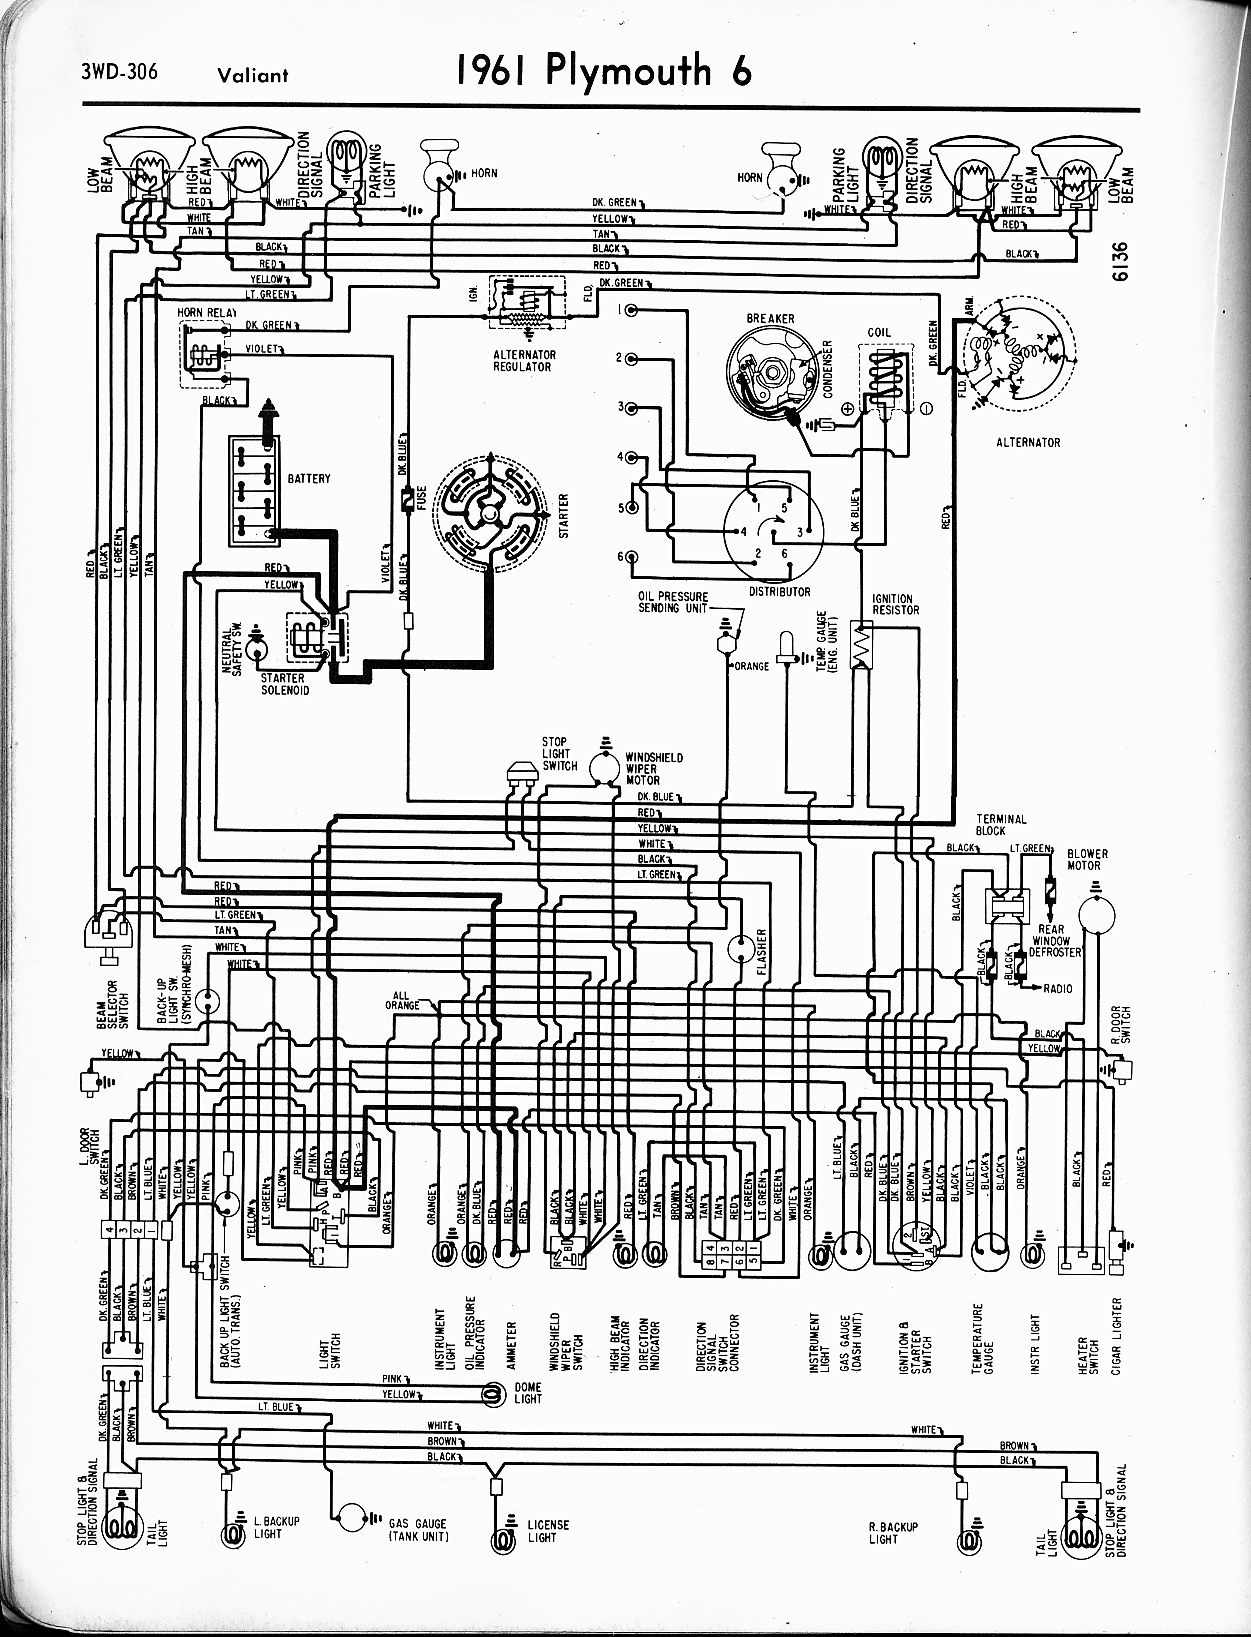 1956 - 1965 Plymouth Wiring - The Old Car Manual Project - Dodge Ignition Wiring Diagram